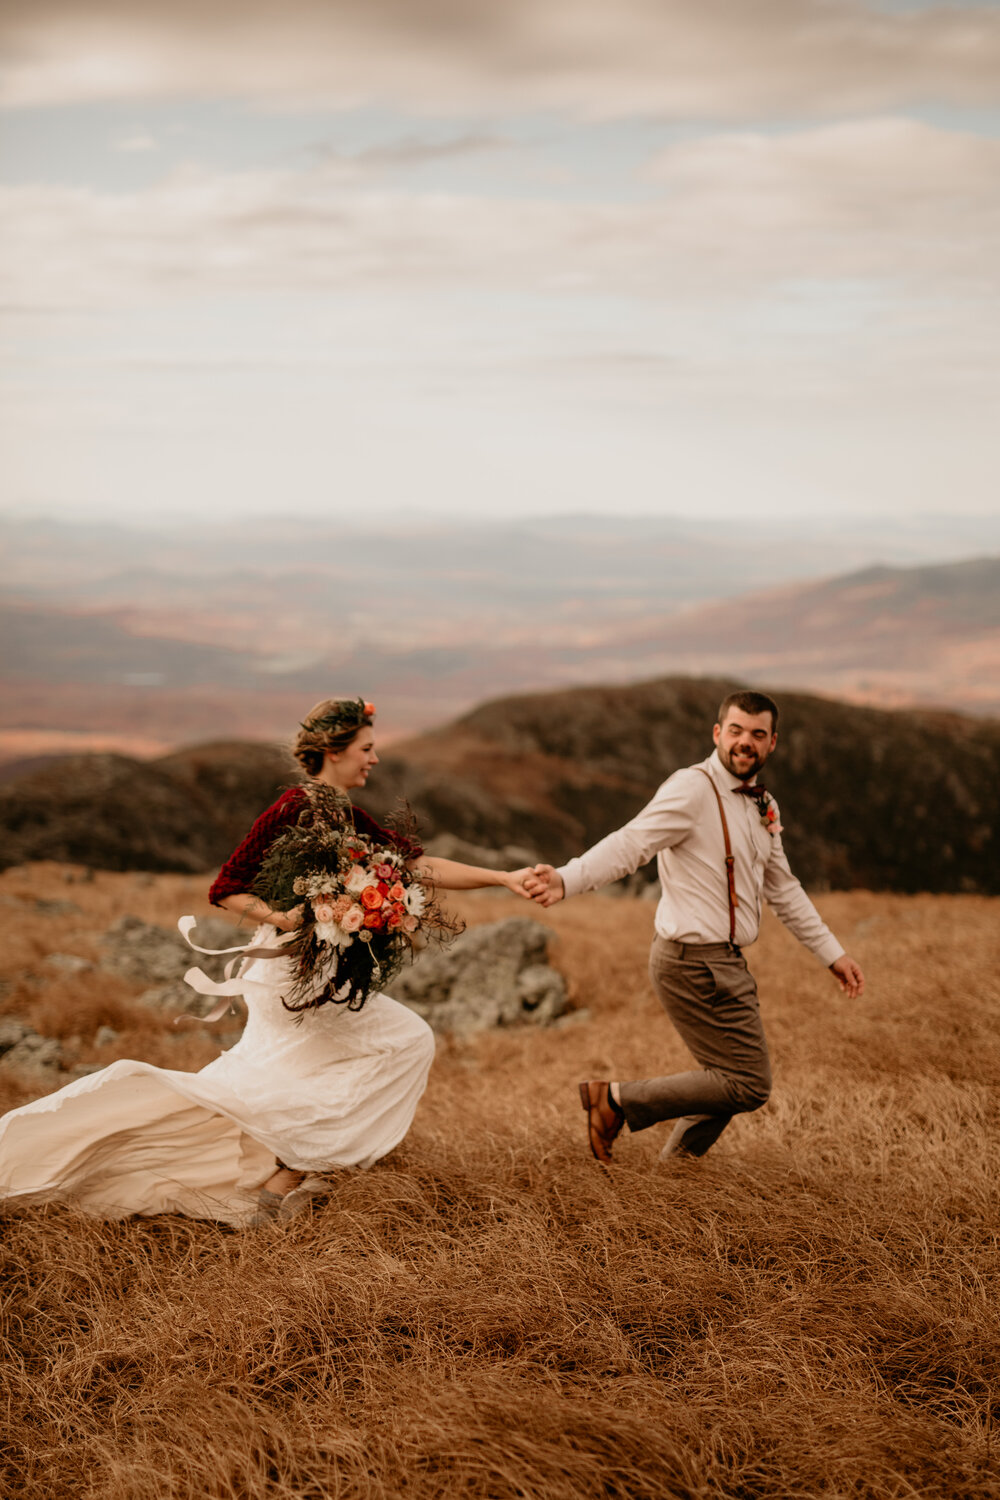 how to elope safely during covid 19